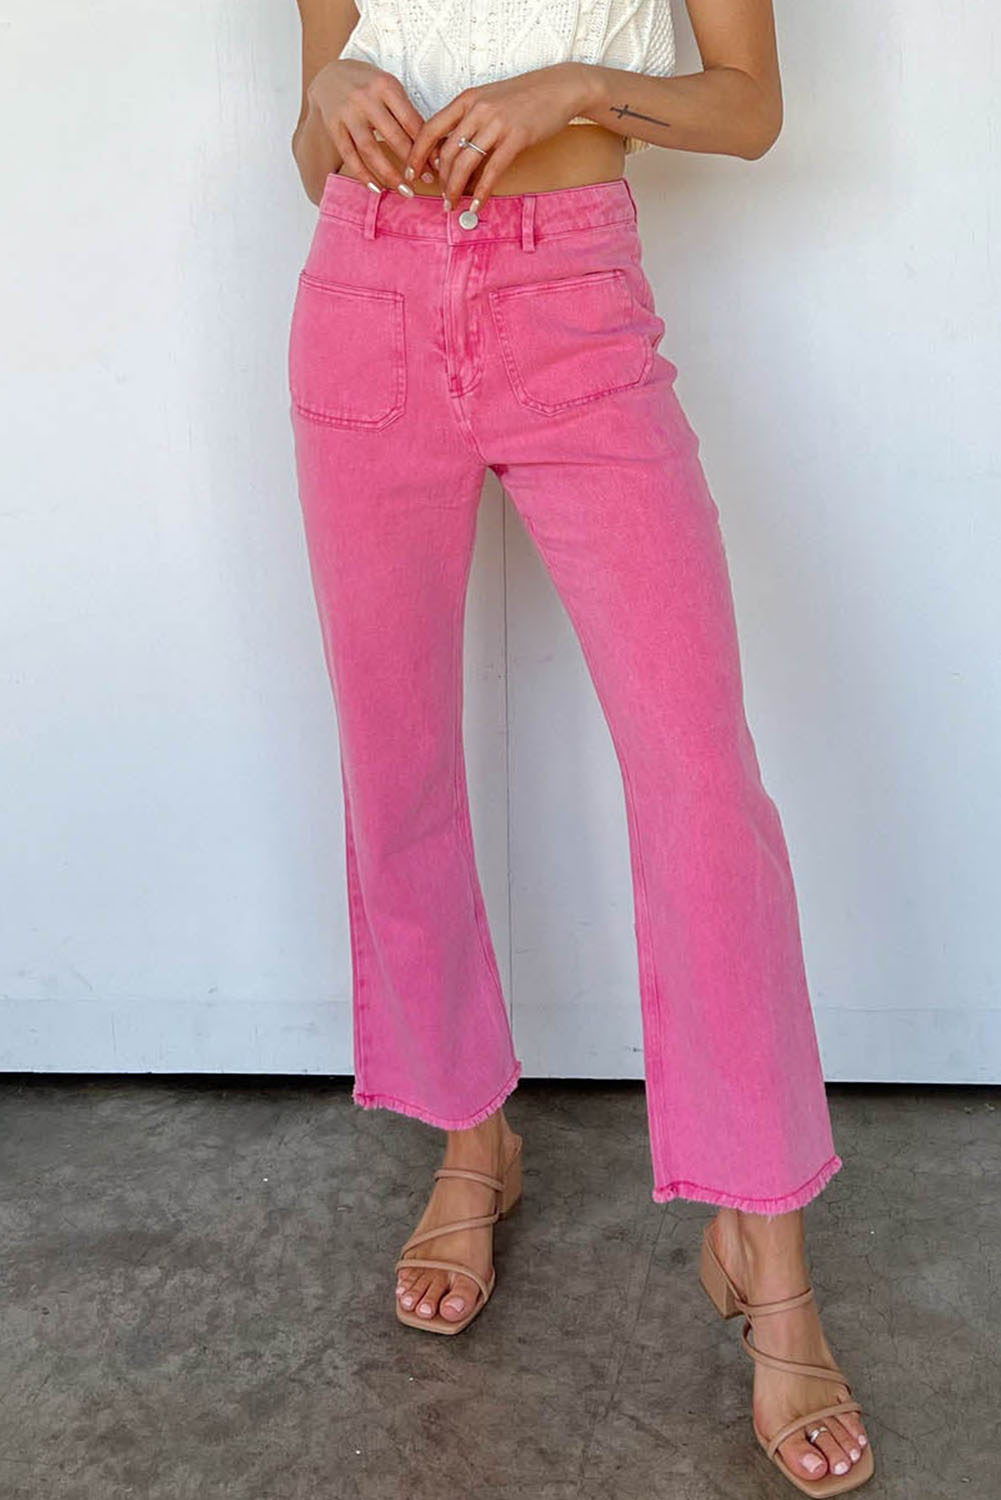 Shewin Wholesale Clothing Suppliers Pink Raw Hem Light Wash Flare Mid Rise PANTS